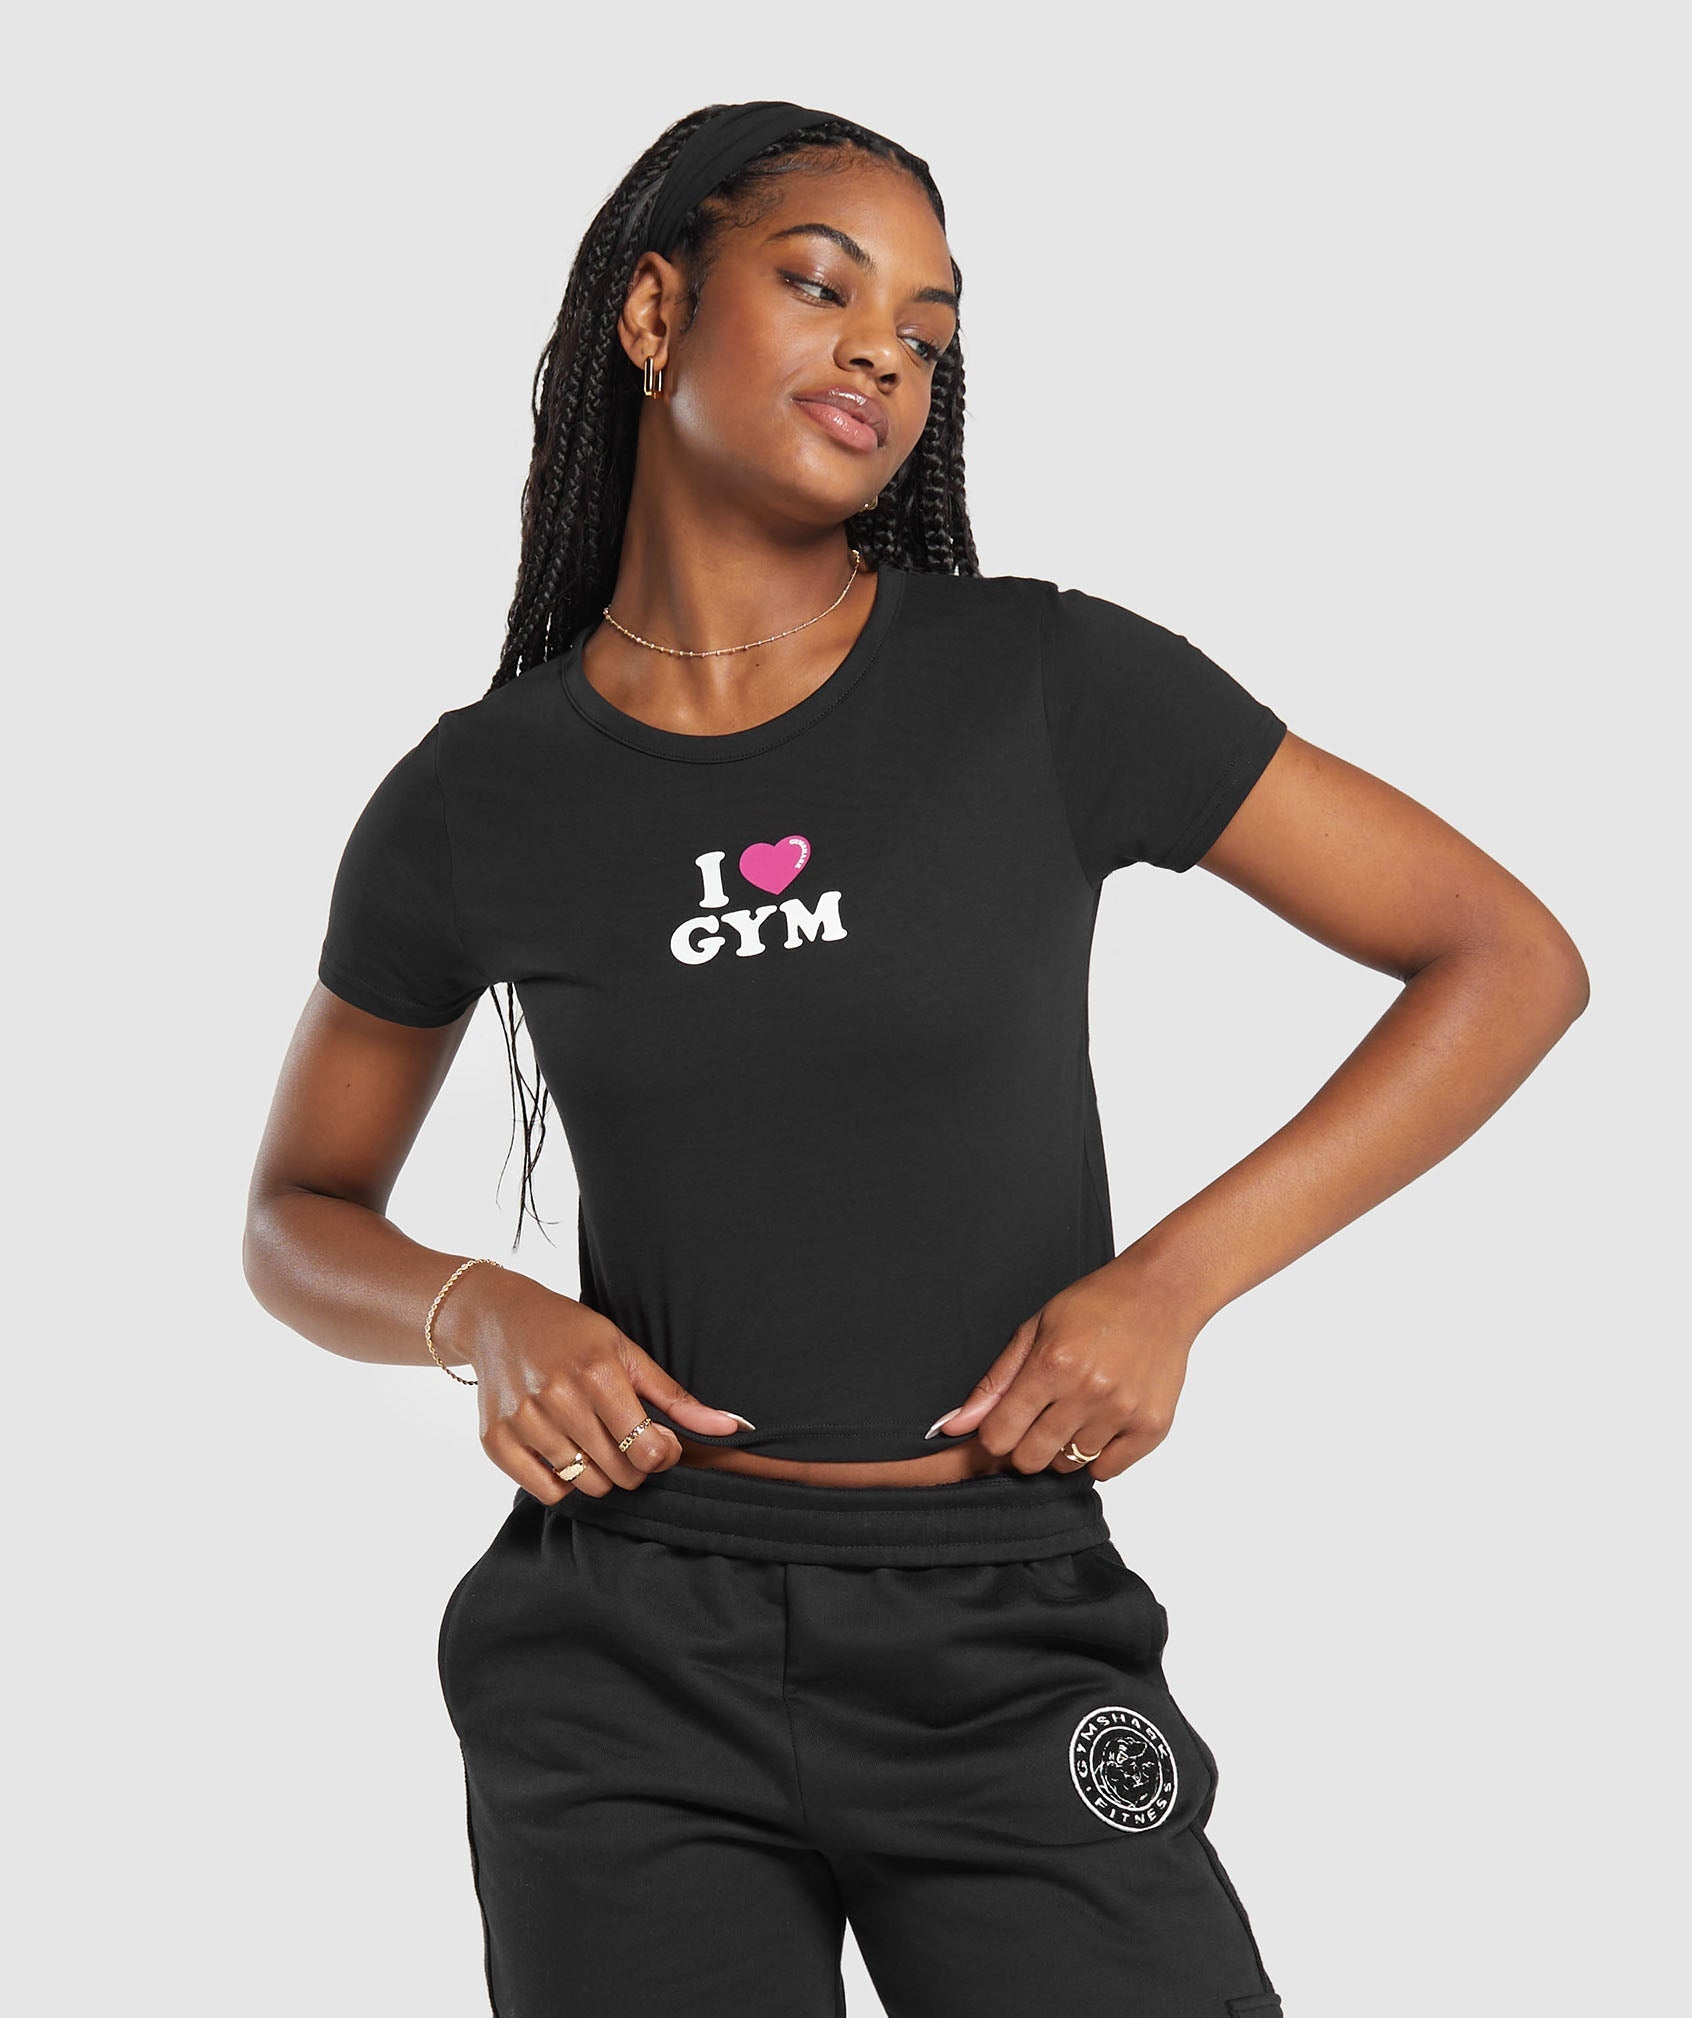 I Heart Gym Baby T-Shirt in Black